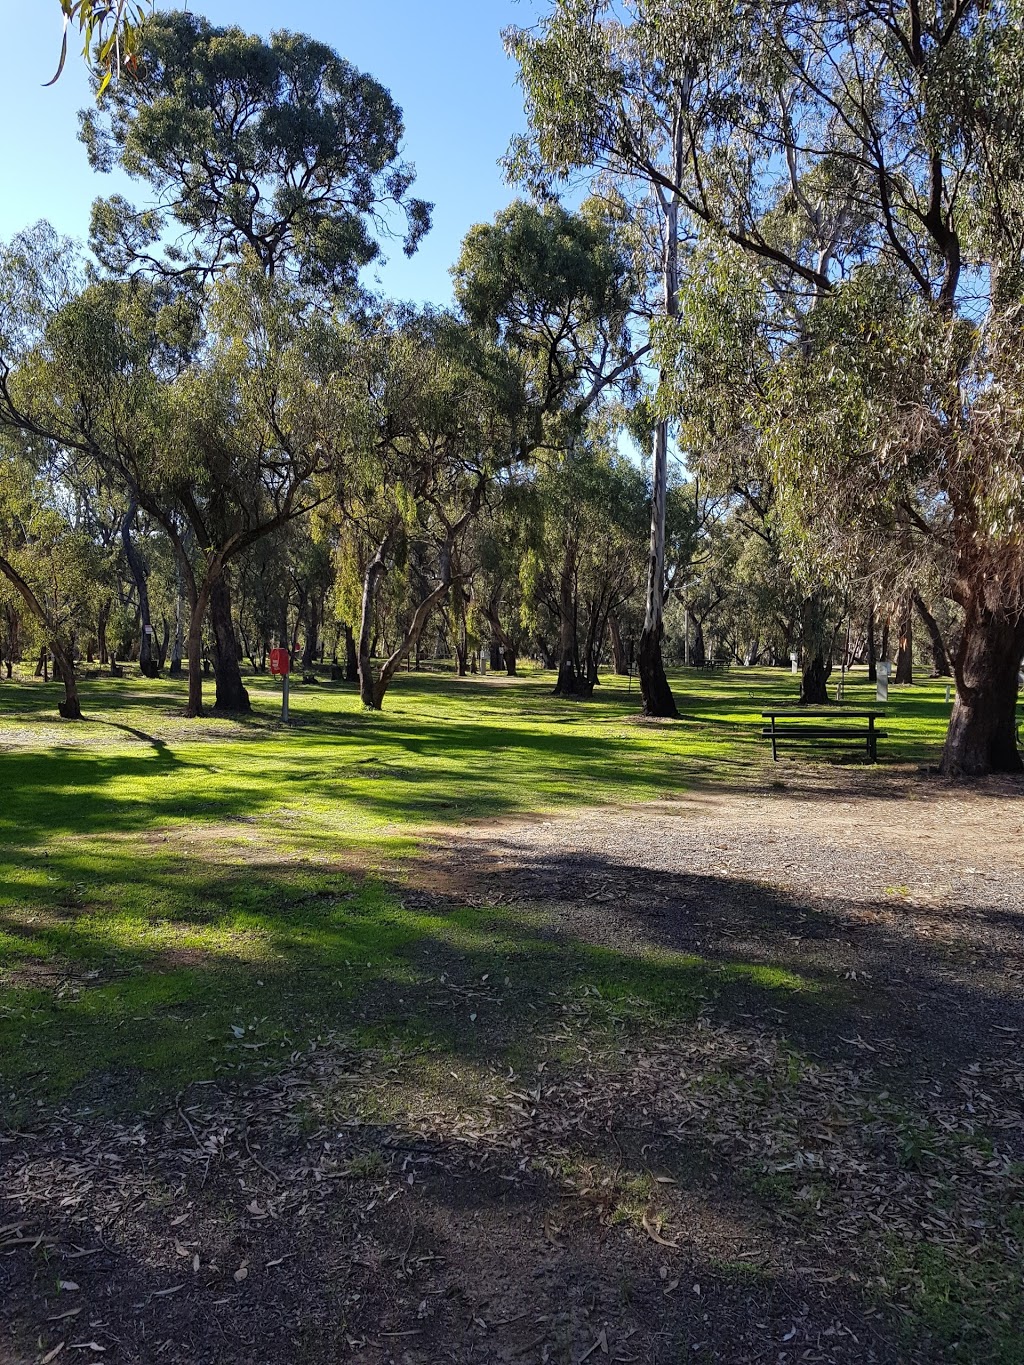 Camp Four Post | campground | Greaves Rd, Deniliquin NSW 2710, Australia | 0413770016 OR +61 413 770 016